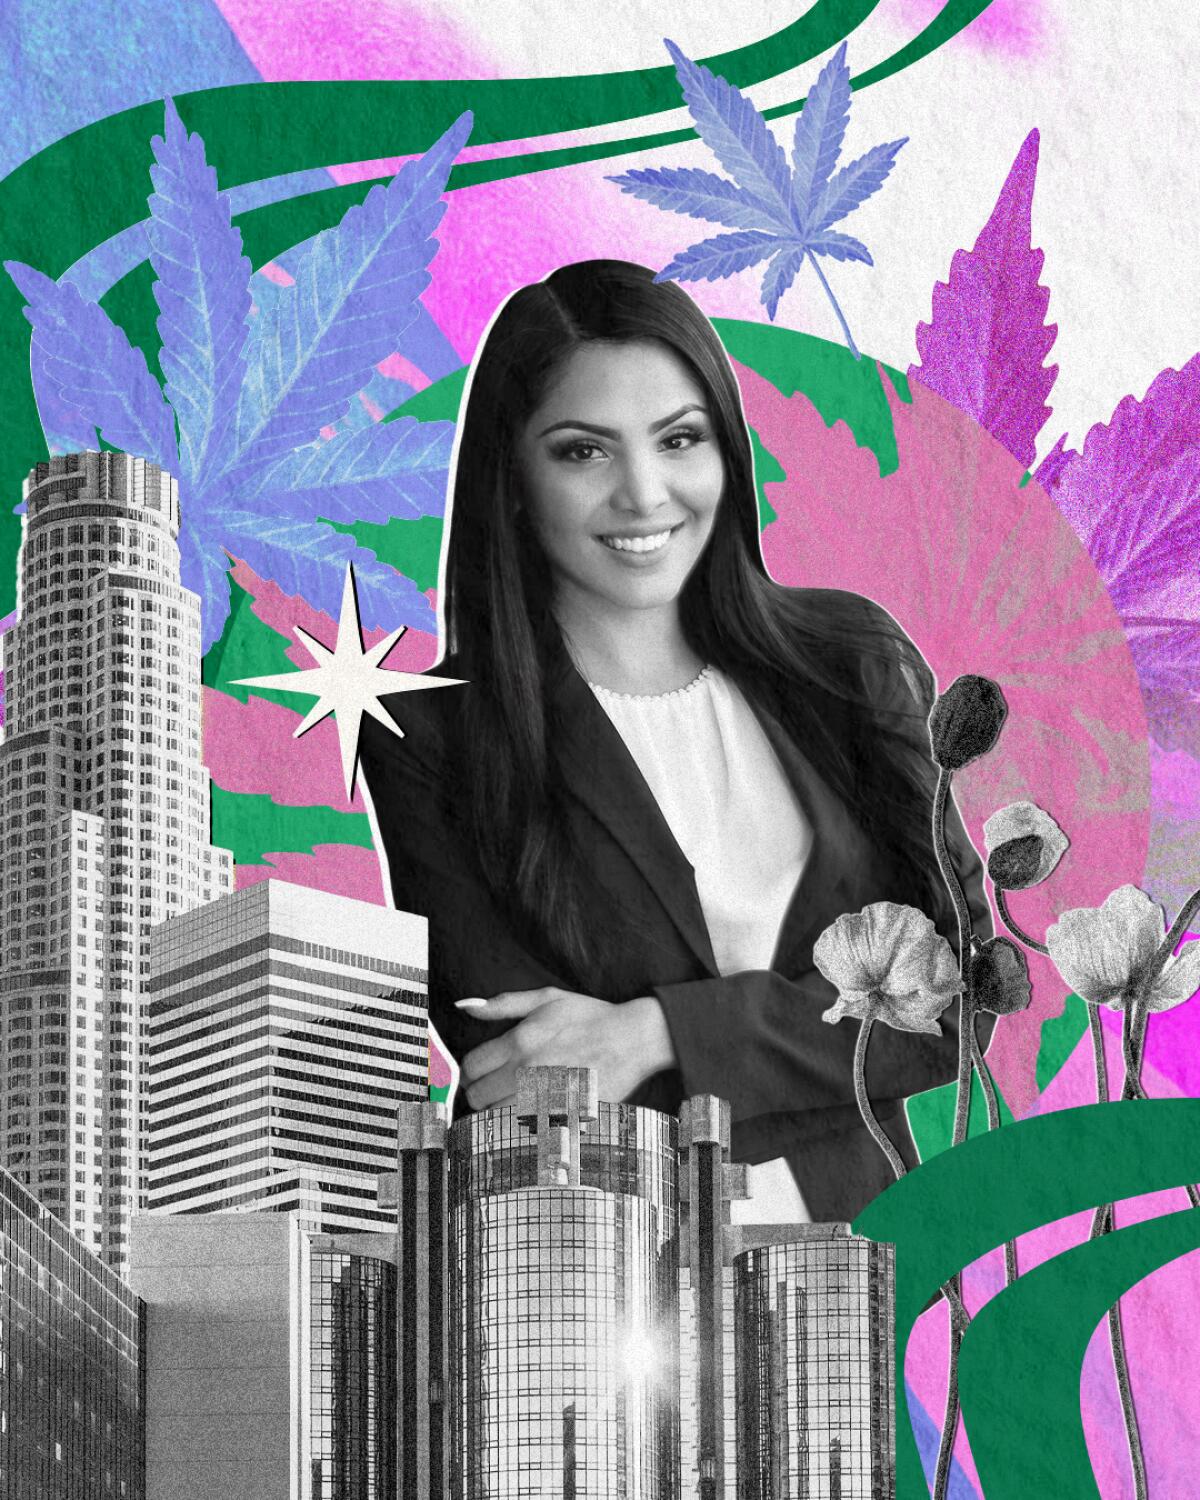 An illustration shows a woman standing in front of marijuana prints and behind buildings.